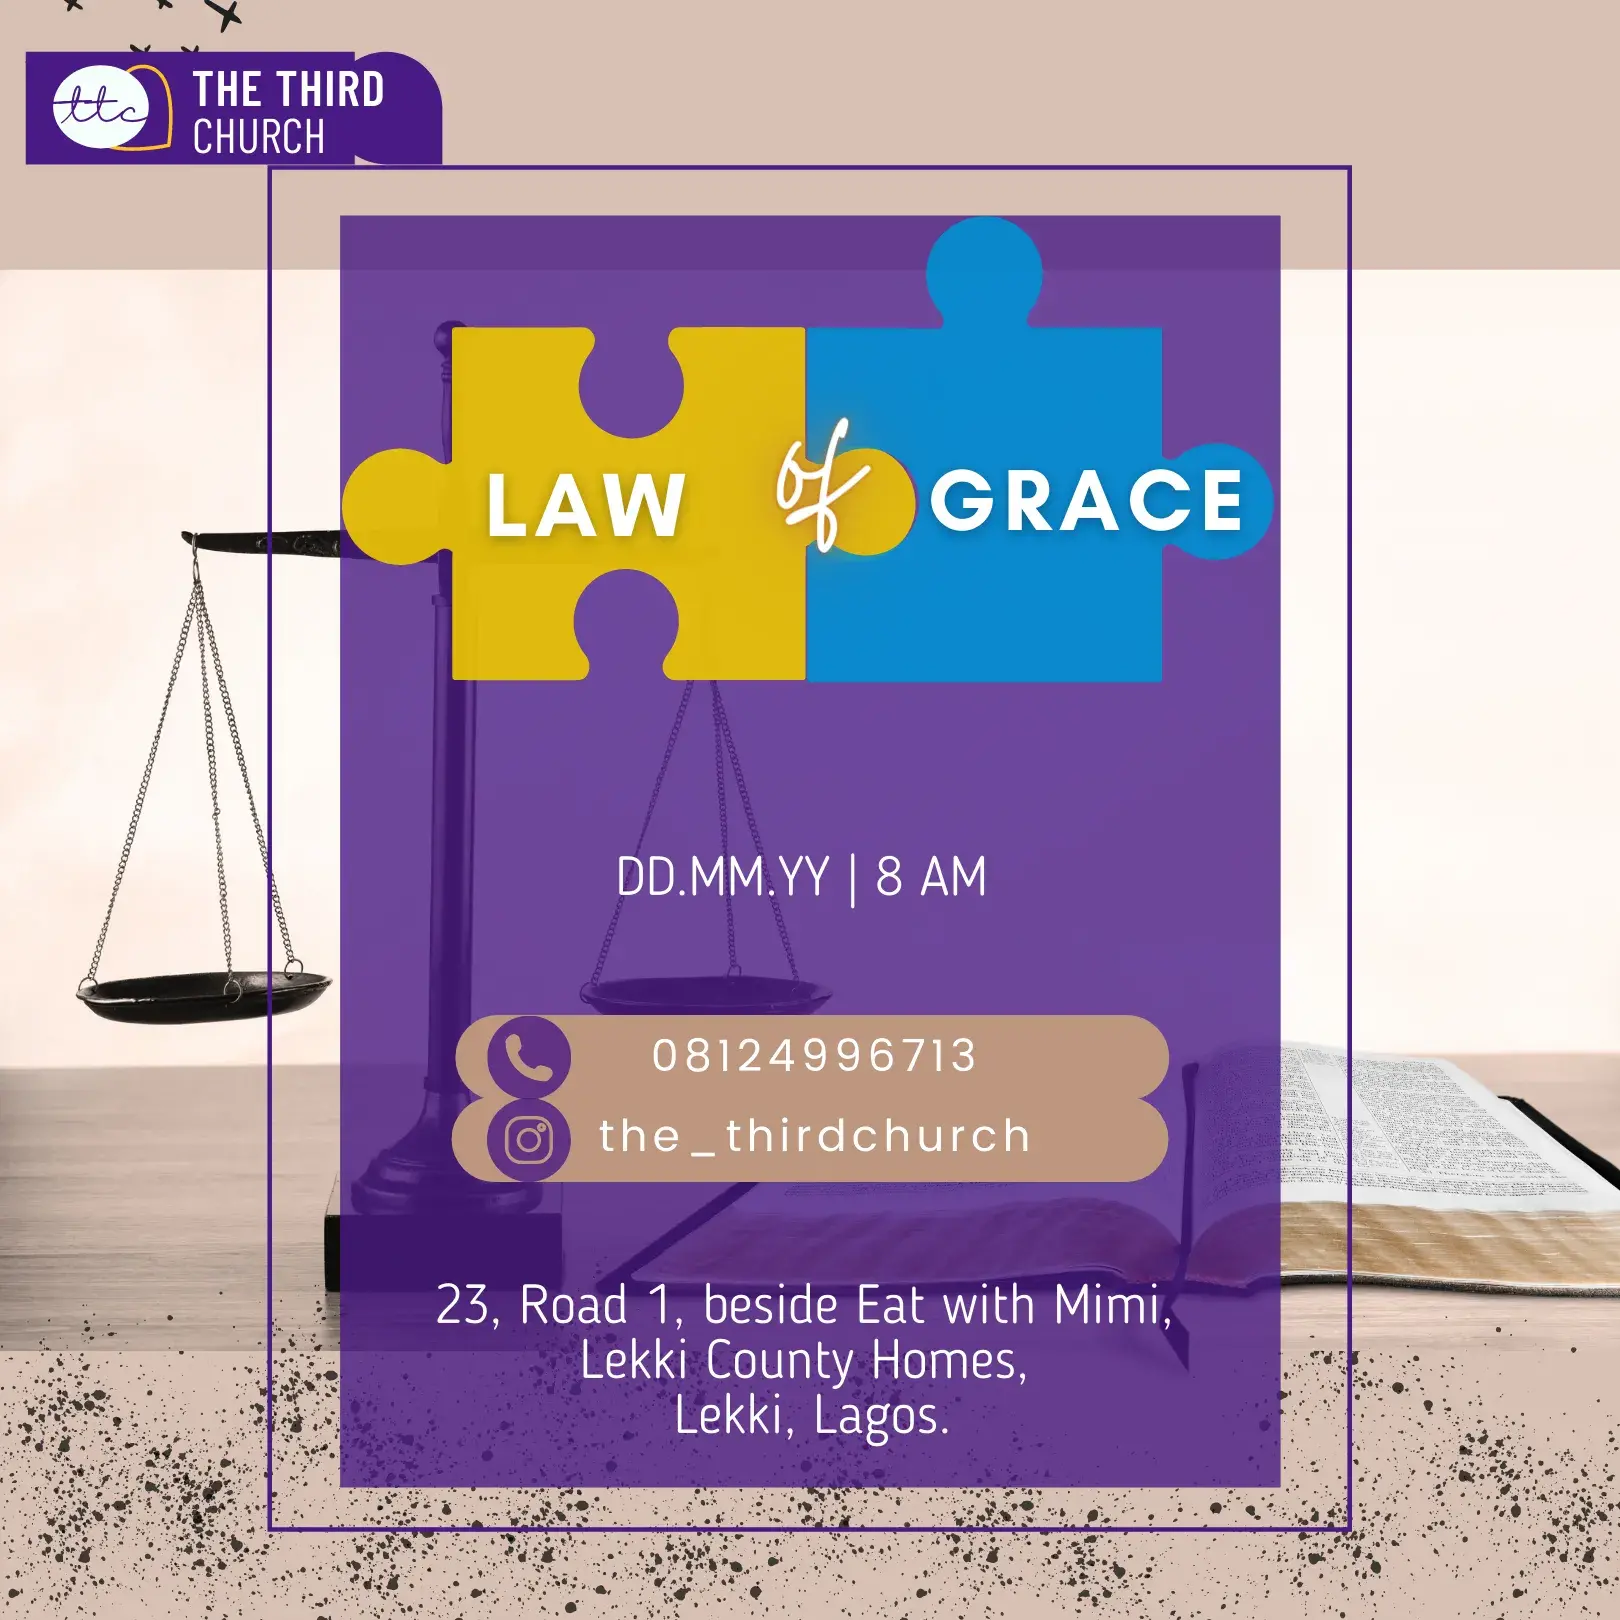 Law of grace by Ultima Expertise